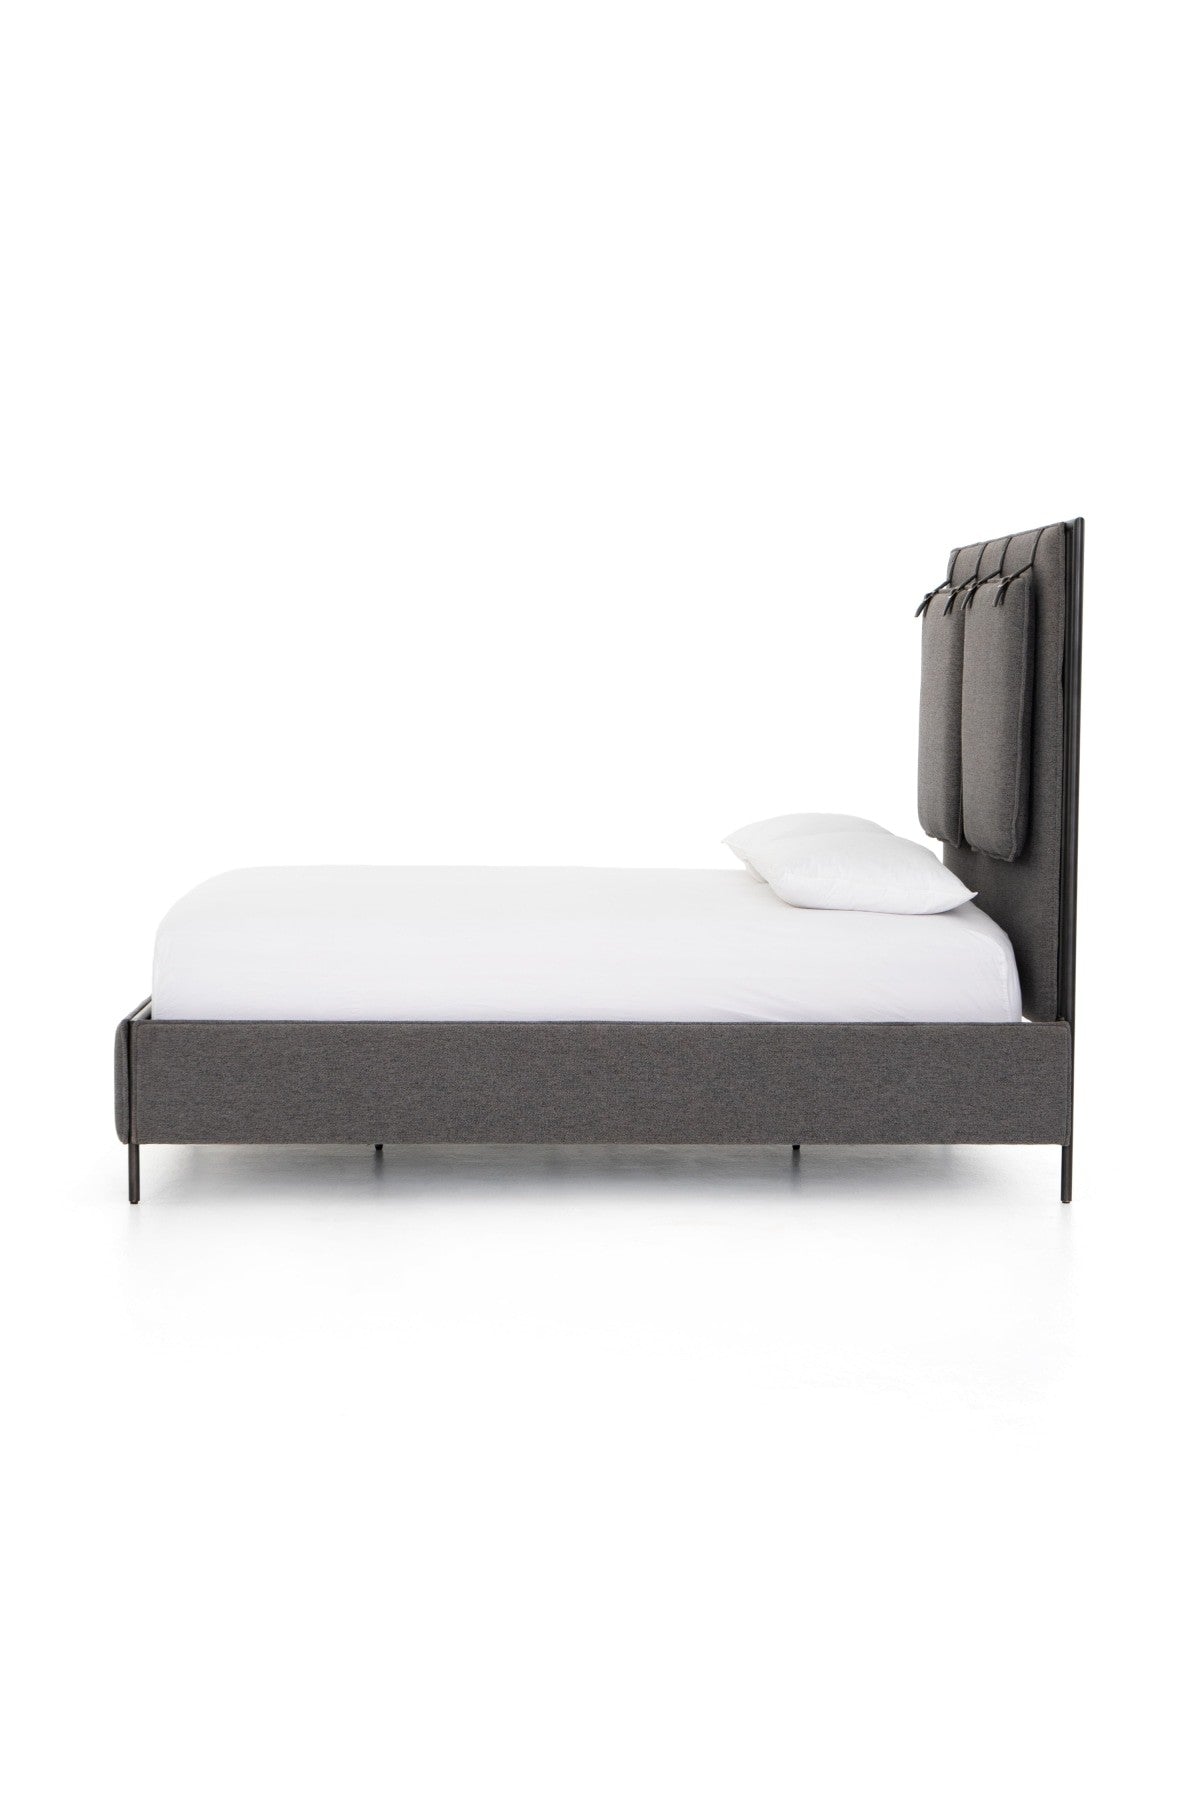 Irondale Bed - San Remo Ash